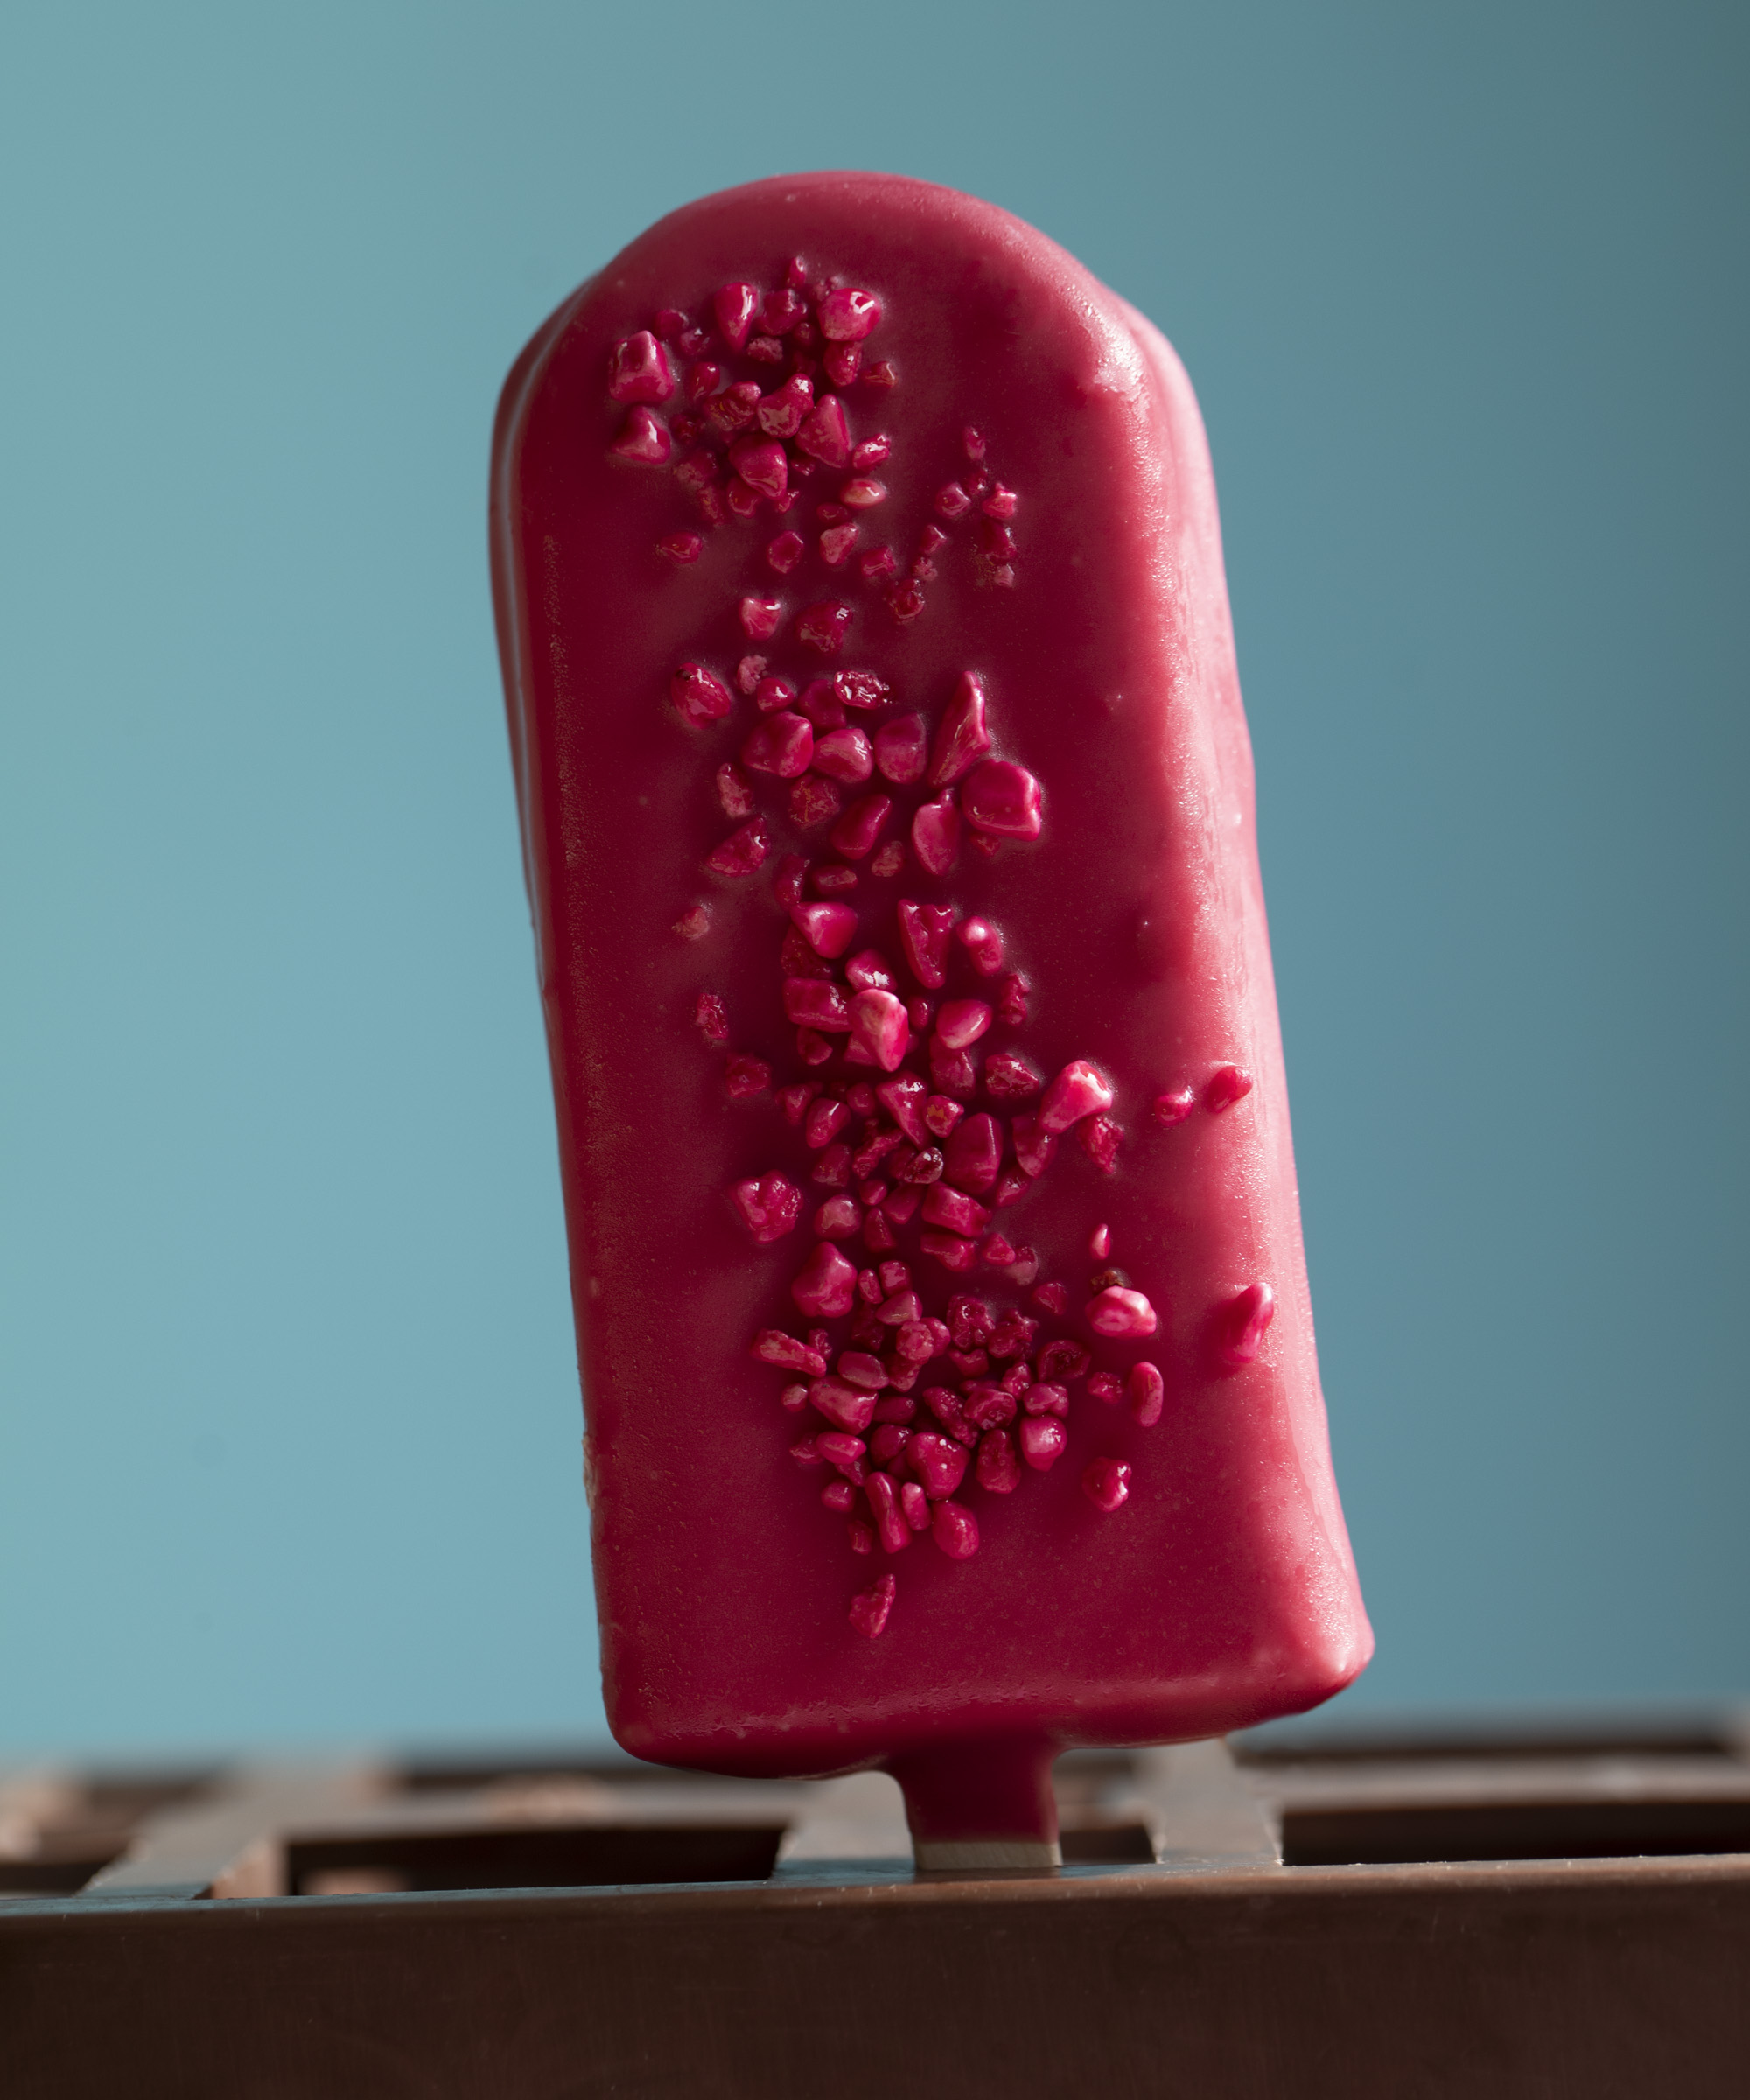 Pick any two popsicles at OLUFs in Østerbro – The season for enjoying these Italian-inspired gelatos and sorbets is finally here, and they taste like ‘happiness on a stick’